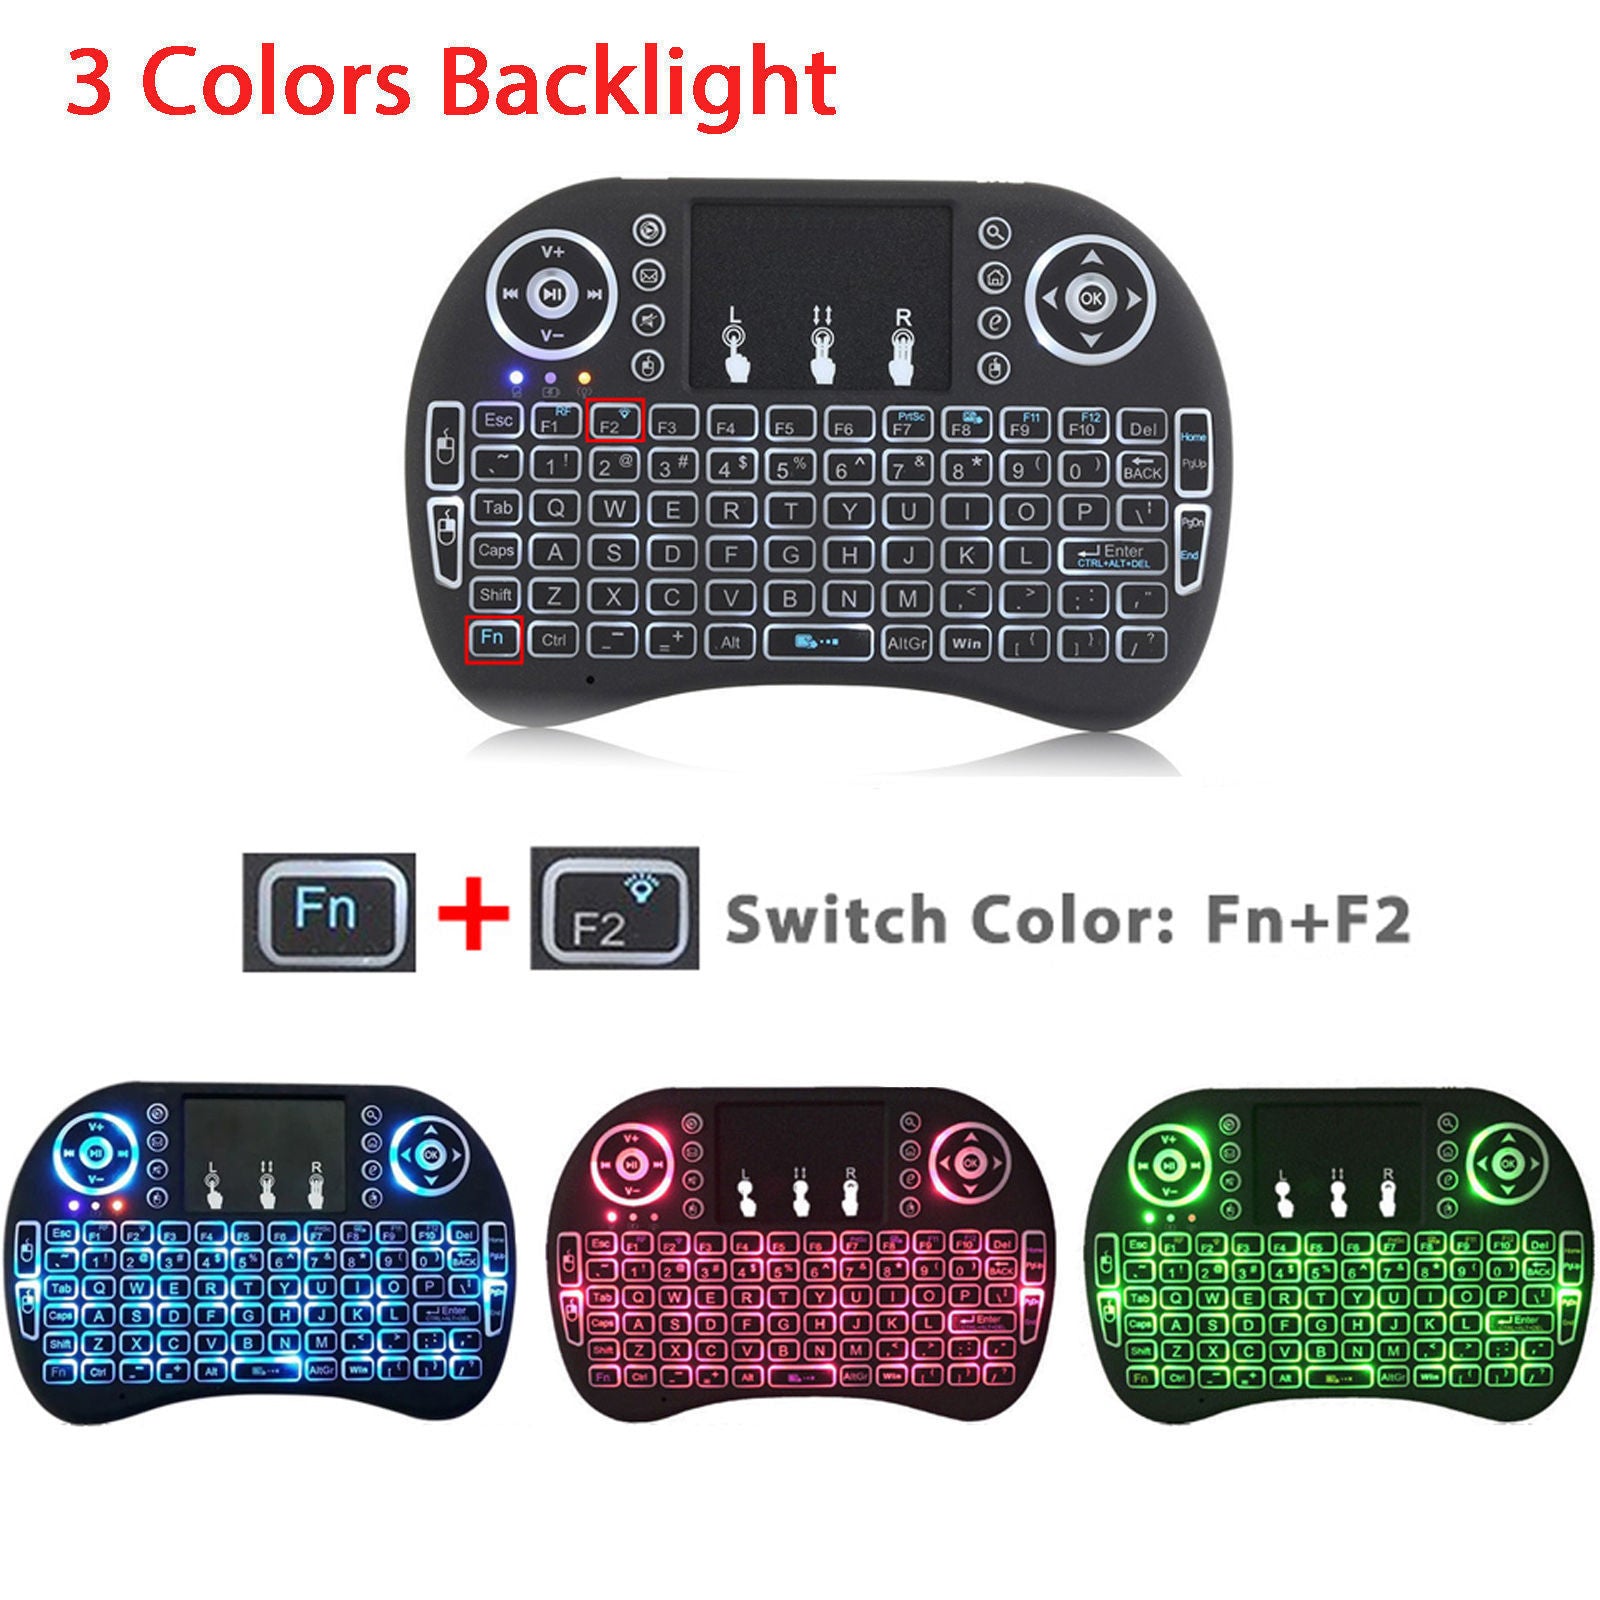 2.4G Backlit Wireless Keyboard Touchpad Rechargeable for Smart TV Box Android PC